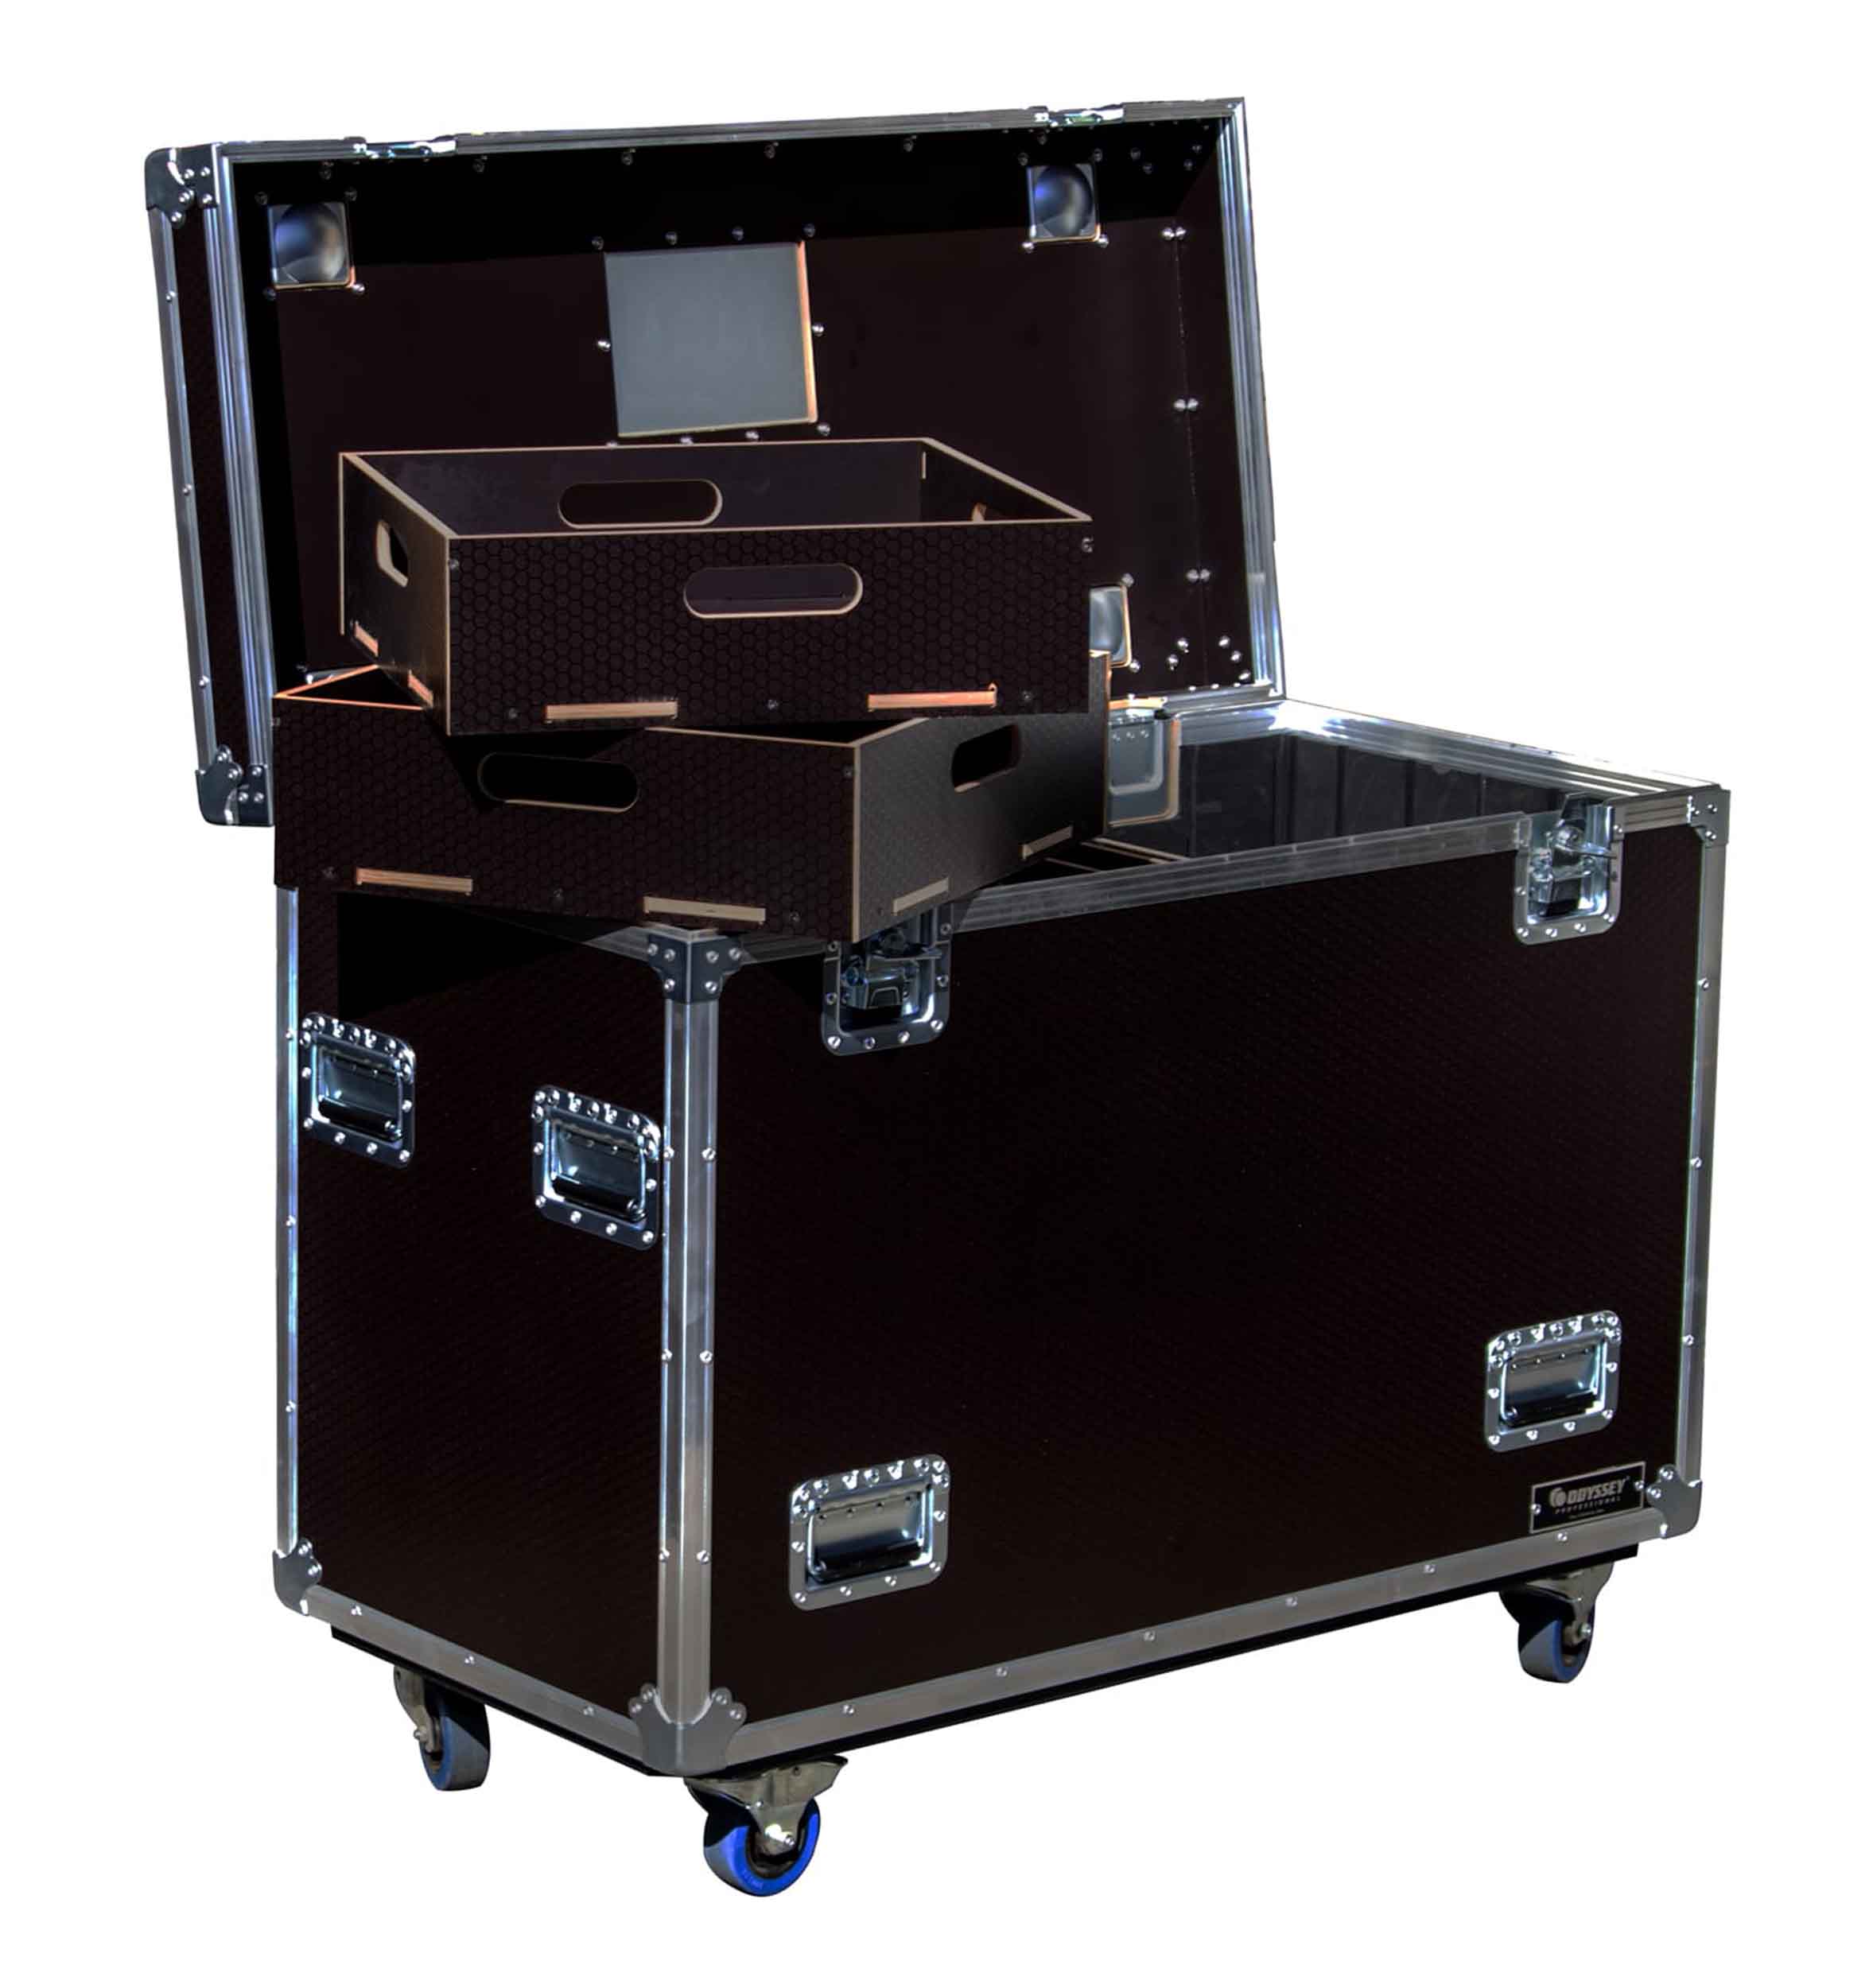 Odyssey OPT452230WBRN, Professional Brown Hex Board Utility Tour Trunk Case with Caster Wheels by Odyssey